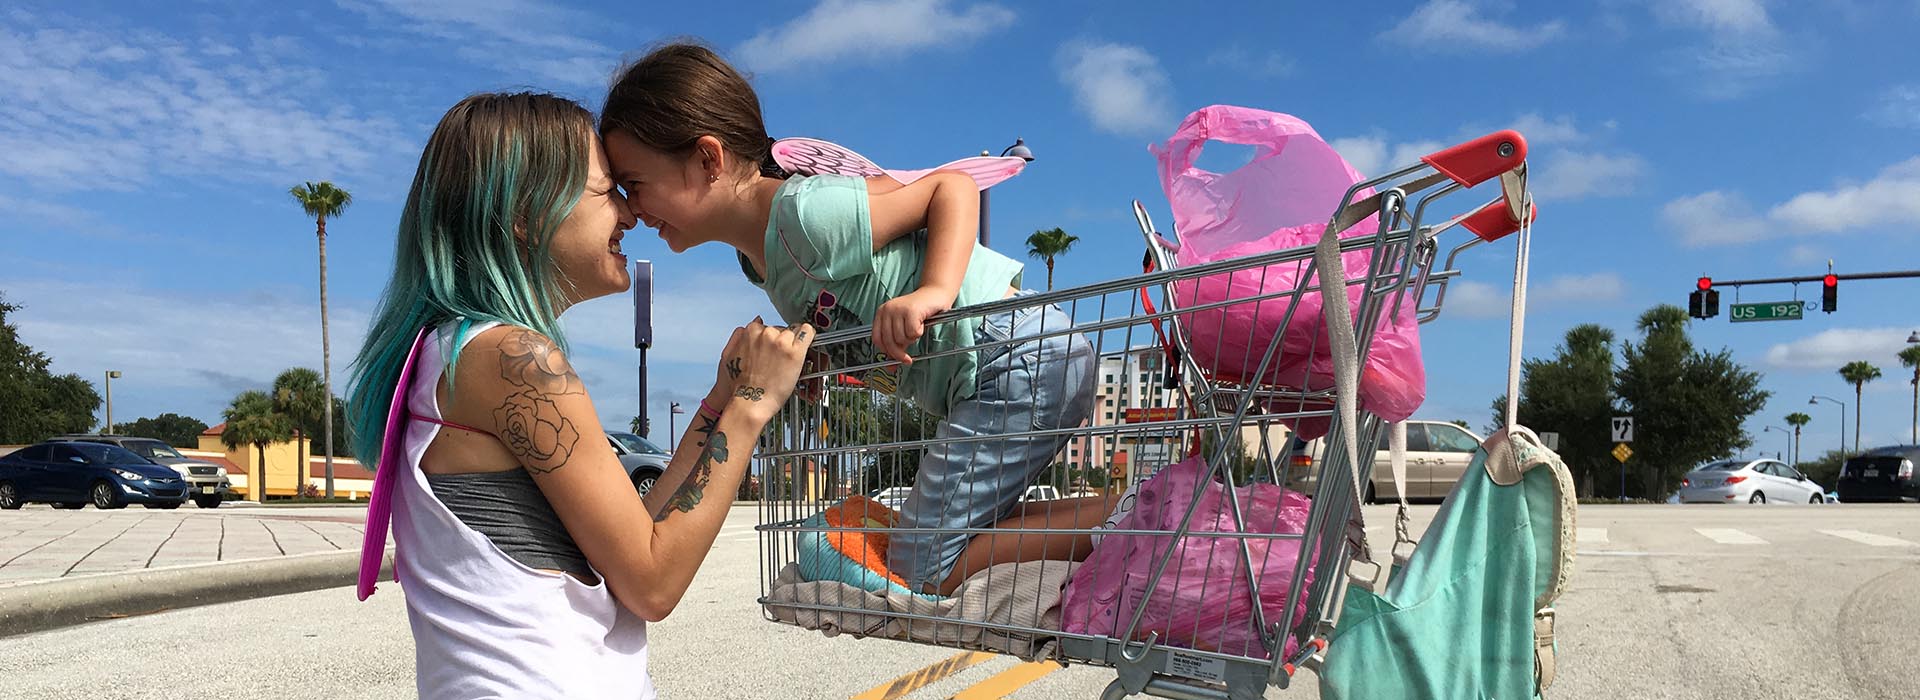 The Florida Project - Neon Films